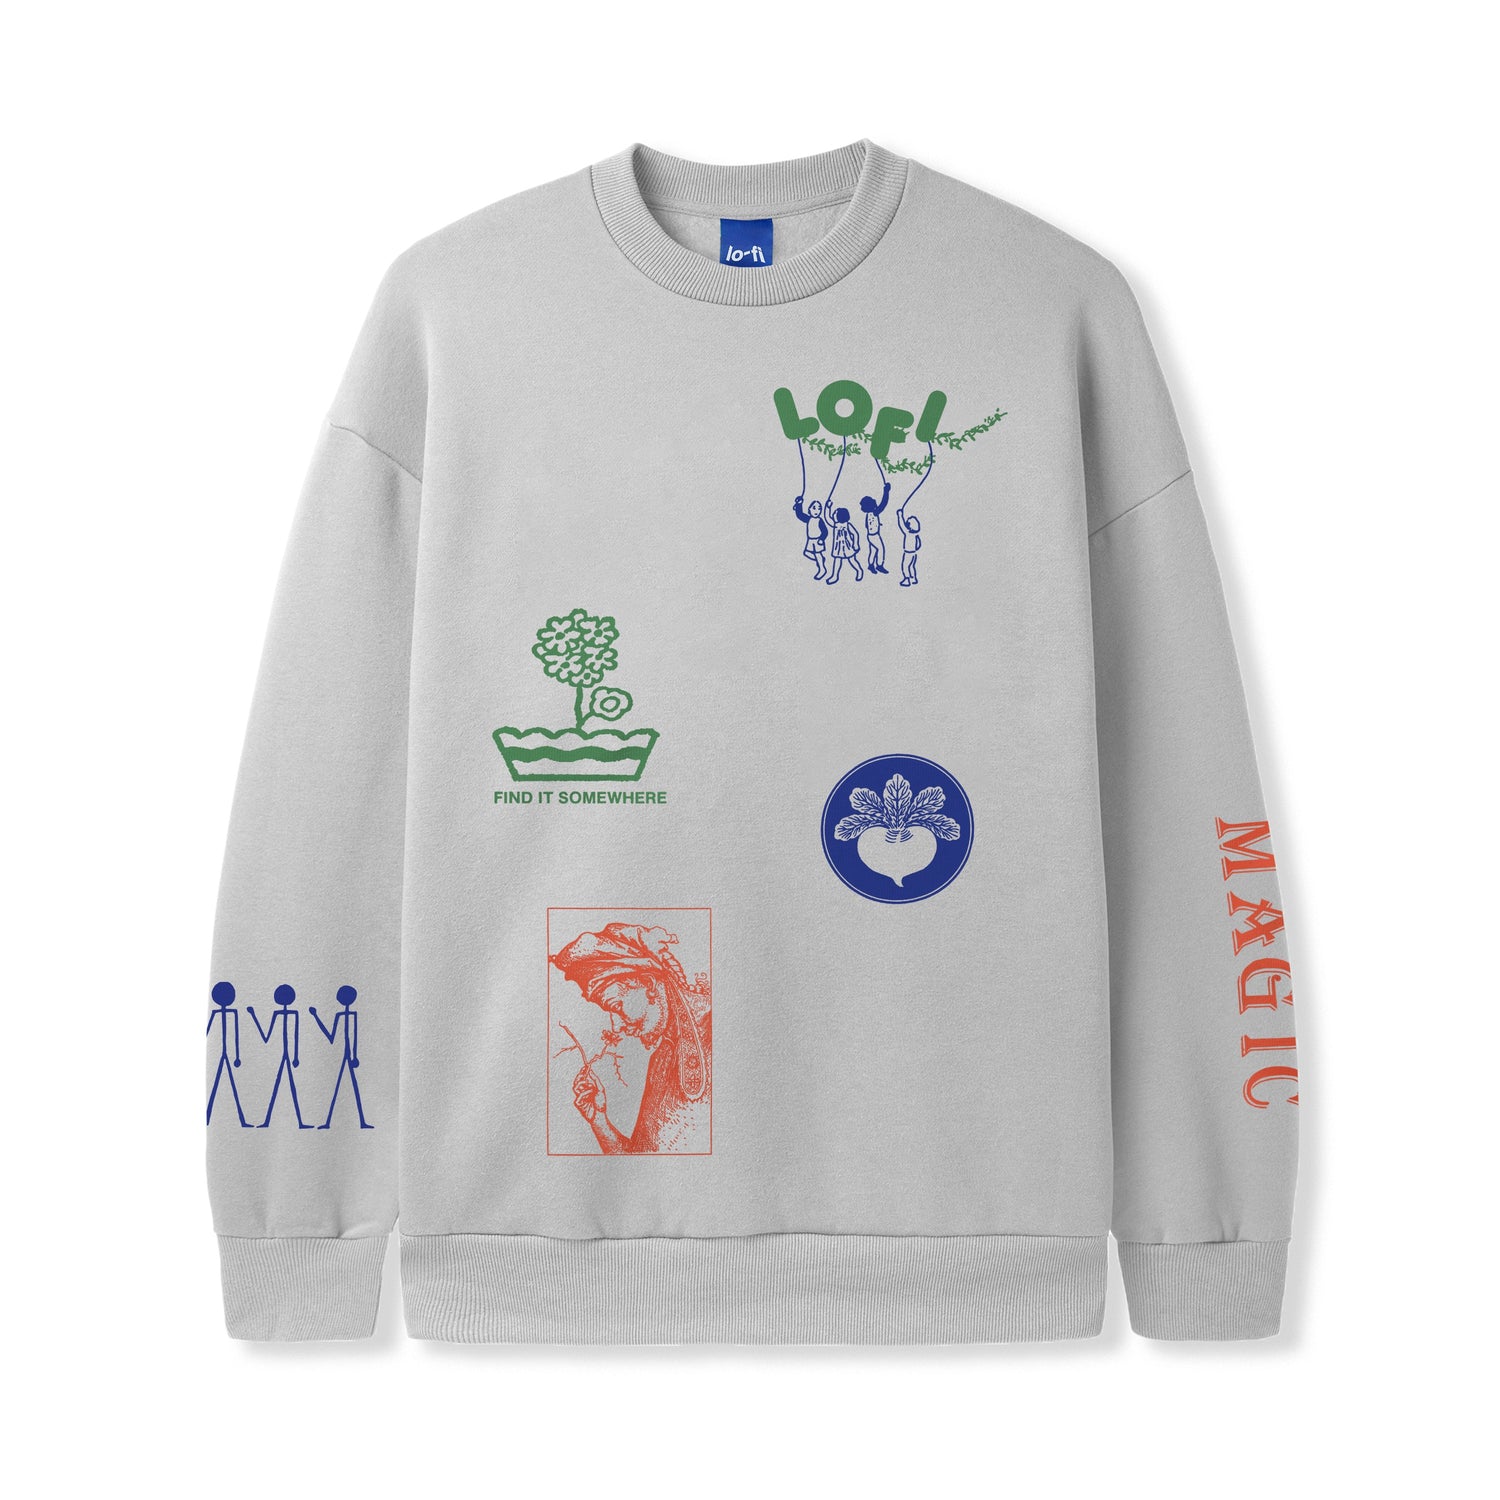 Mother Earth All Over Print Crewneck, Cement